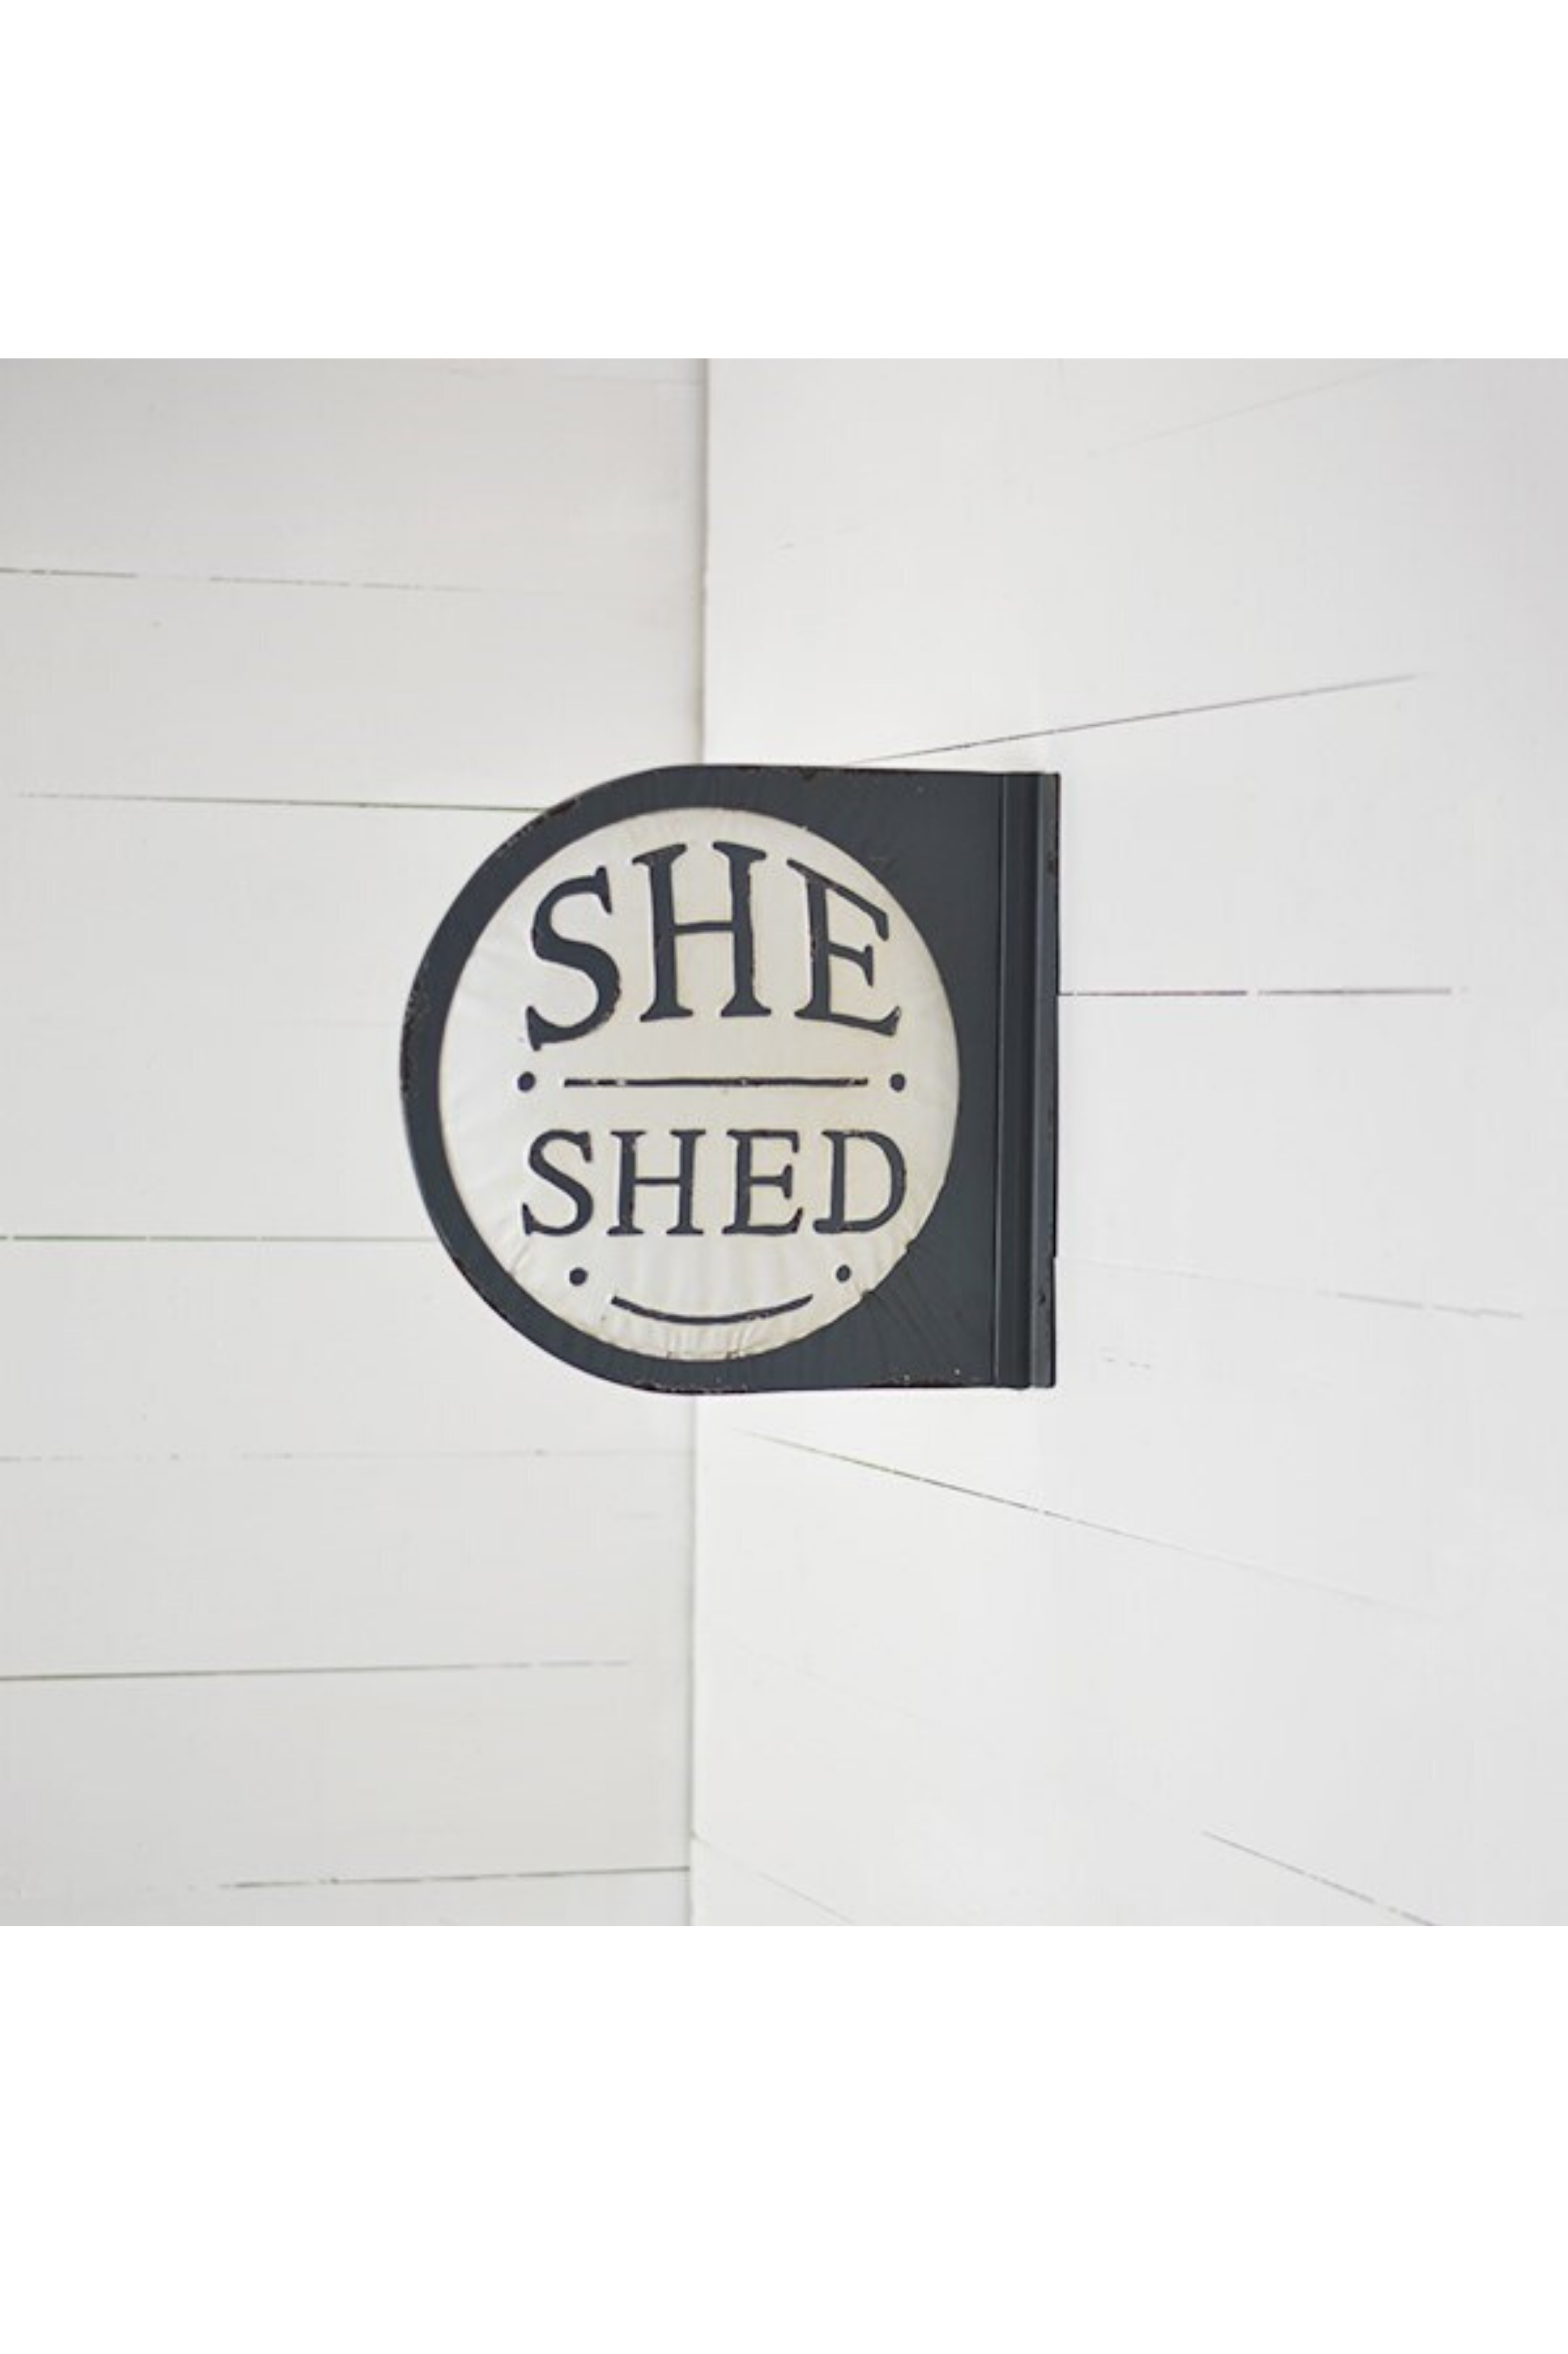 ROUND SHE SHED TIN SIGN